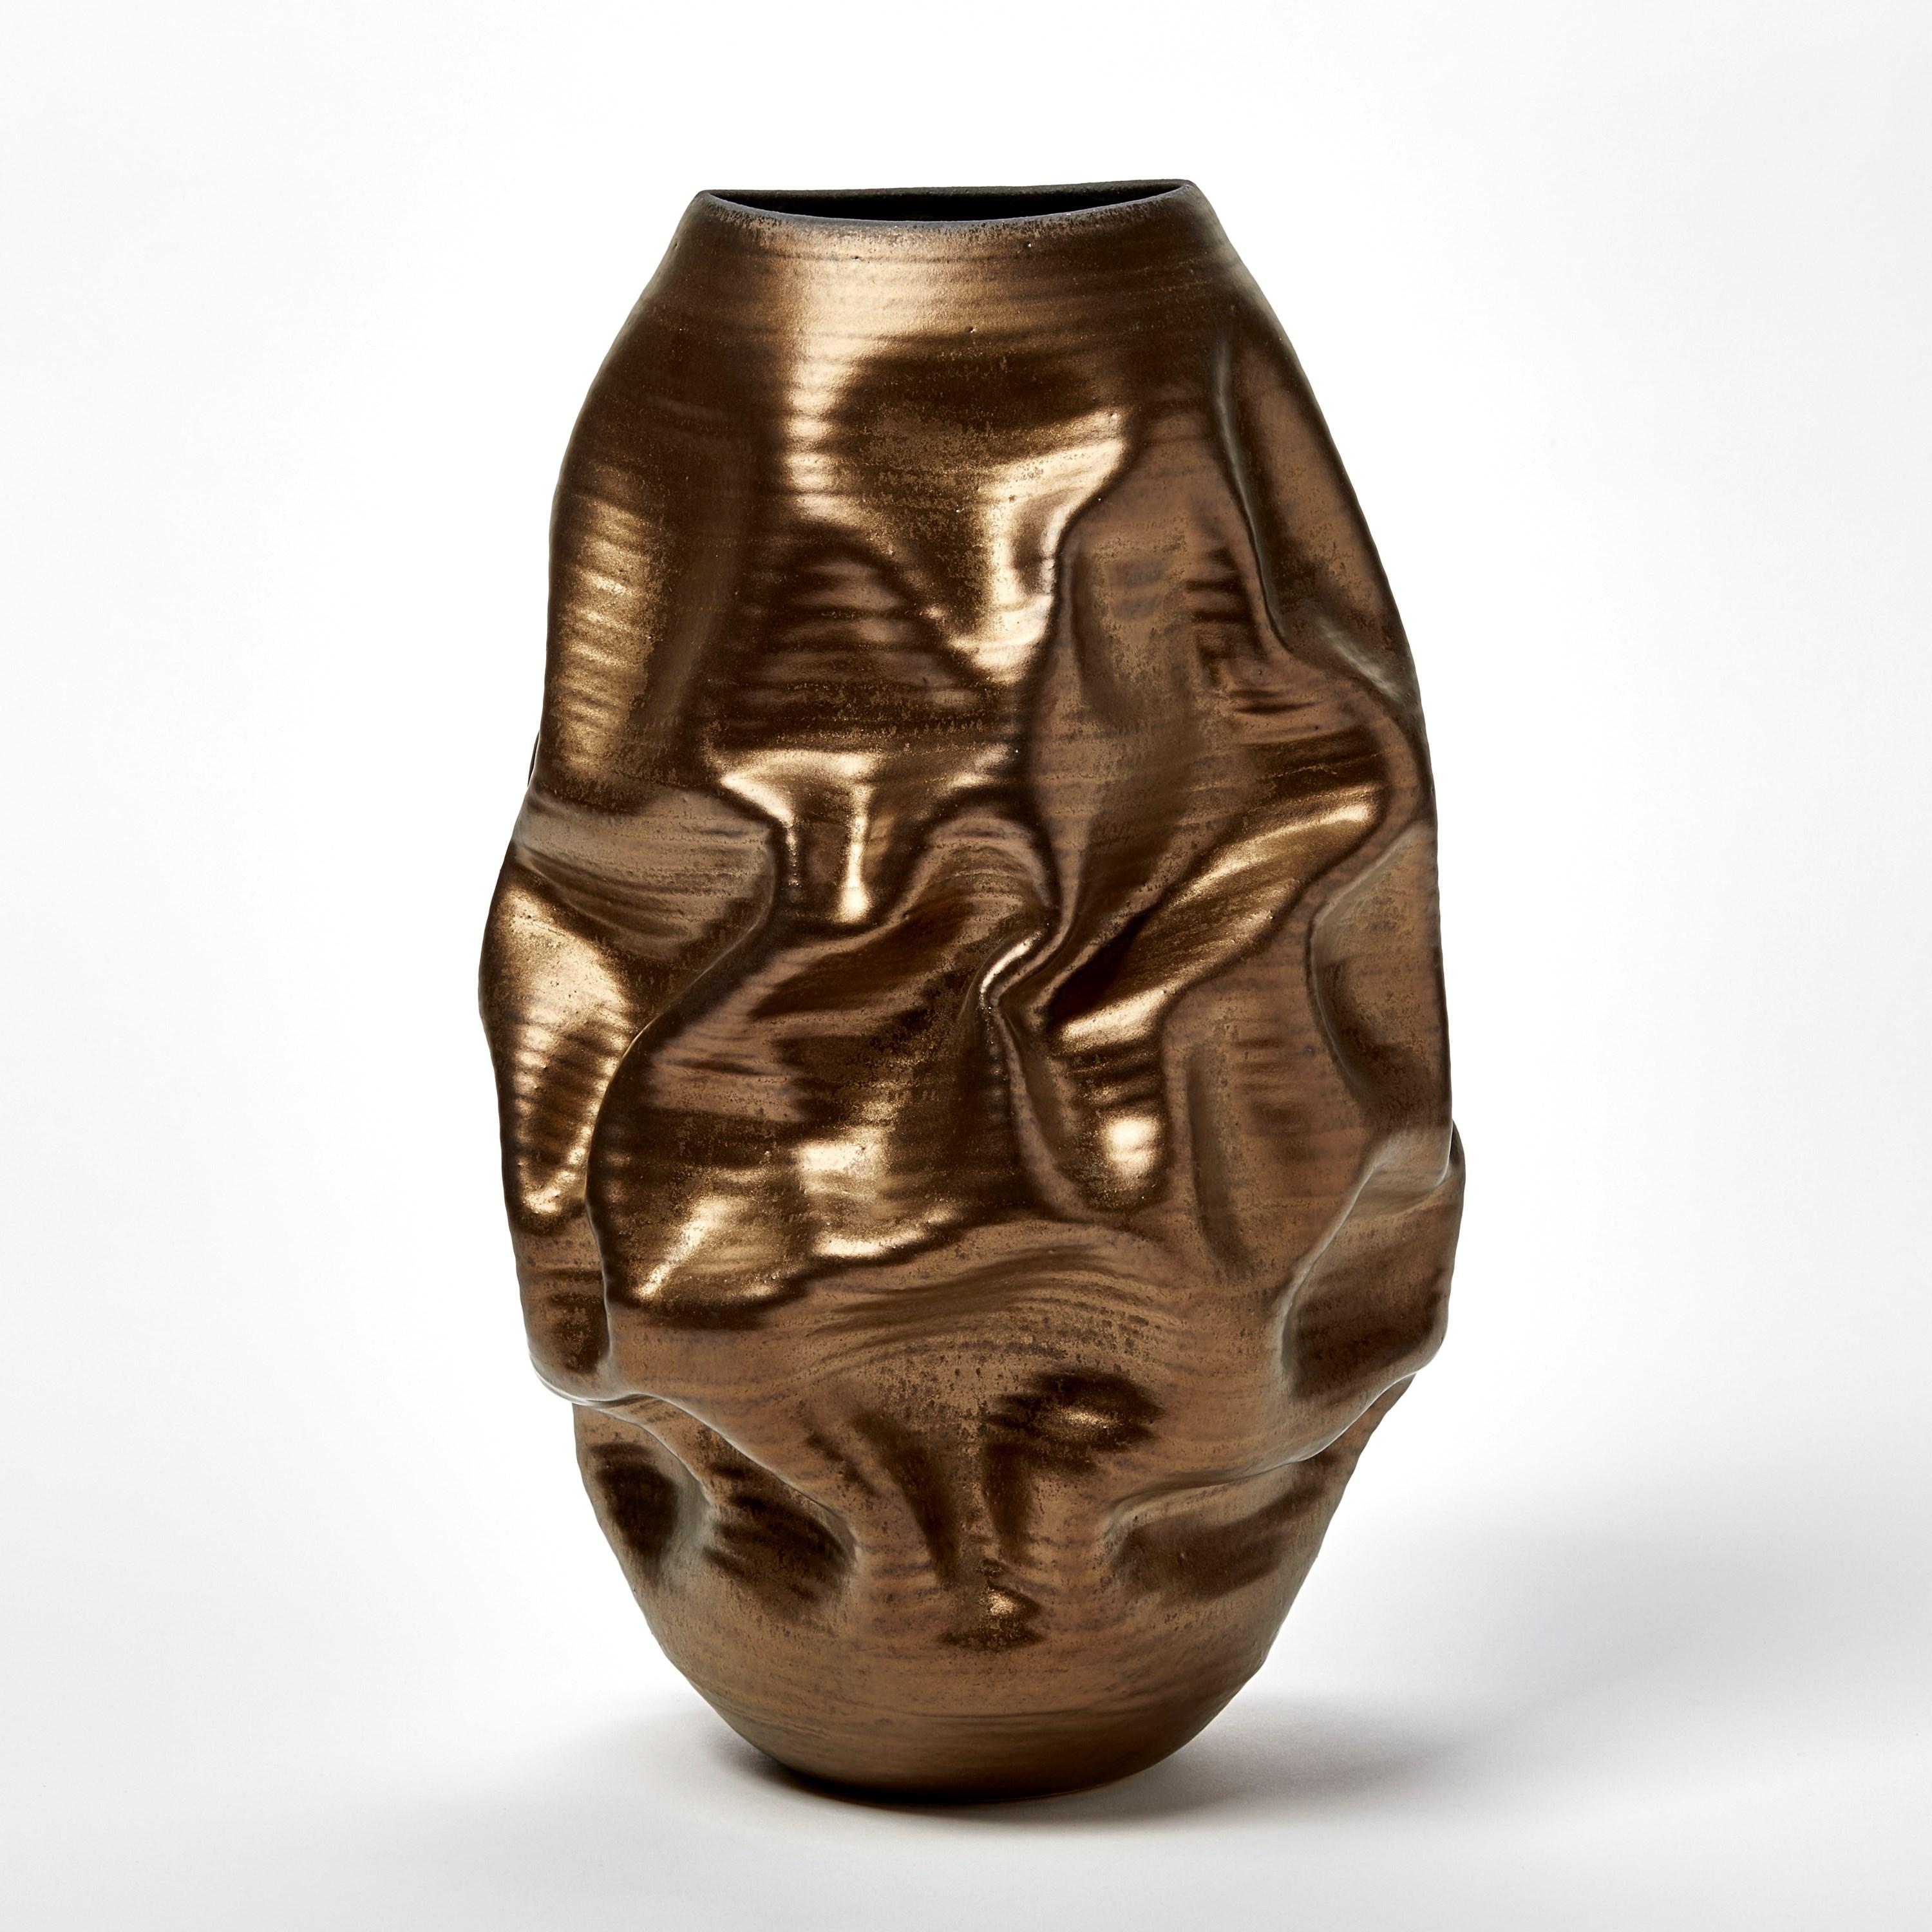 ‘Tall Gold Crumpled Form No 97’ is a unique sculptural vessel by the British artist, Nicholas Arroyave-Portela.

Nicholas Arroyave-Portela’s professional ceramic practise began in 1994. After 20 years based in London, he moved and set up his studio